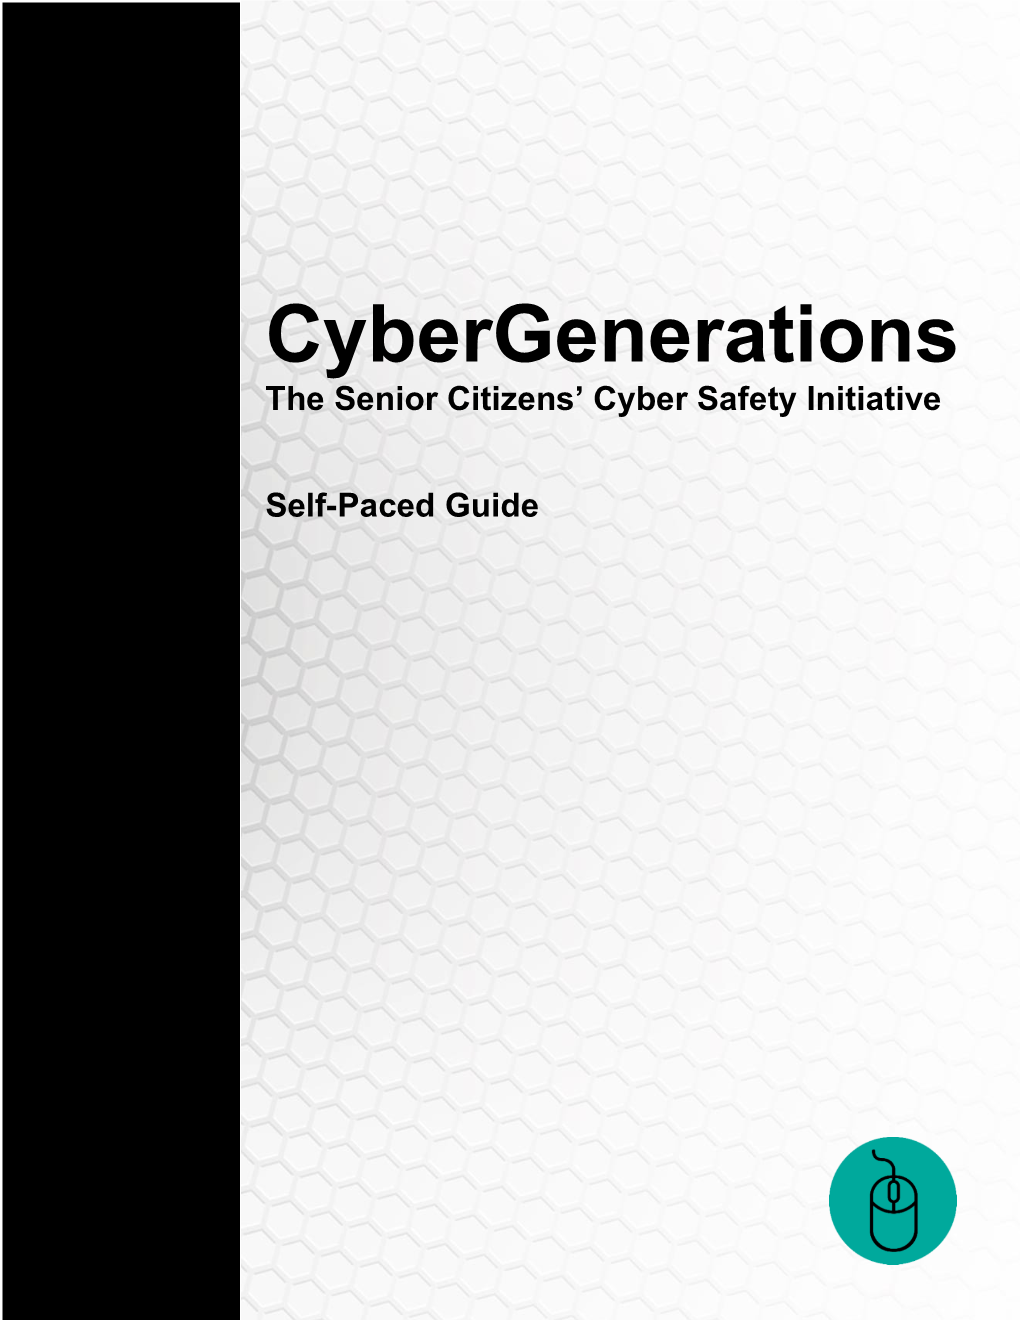 Cybergenerations Self-Paced Guide! We Hope You Enjoyed It and Feel Better Equipped to Protect Yourself from Online Threats